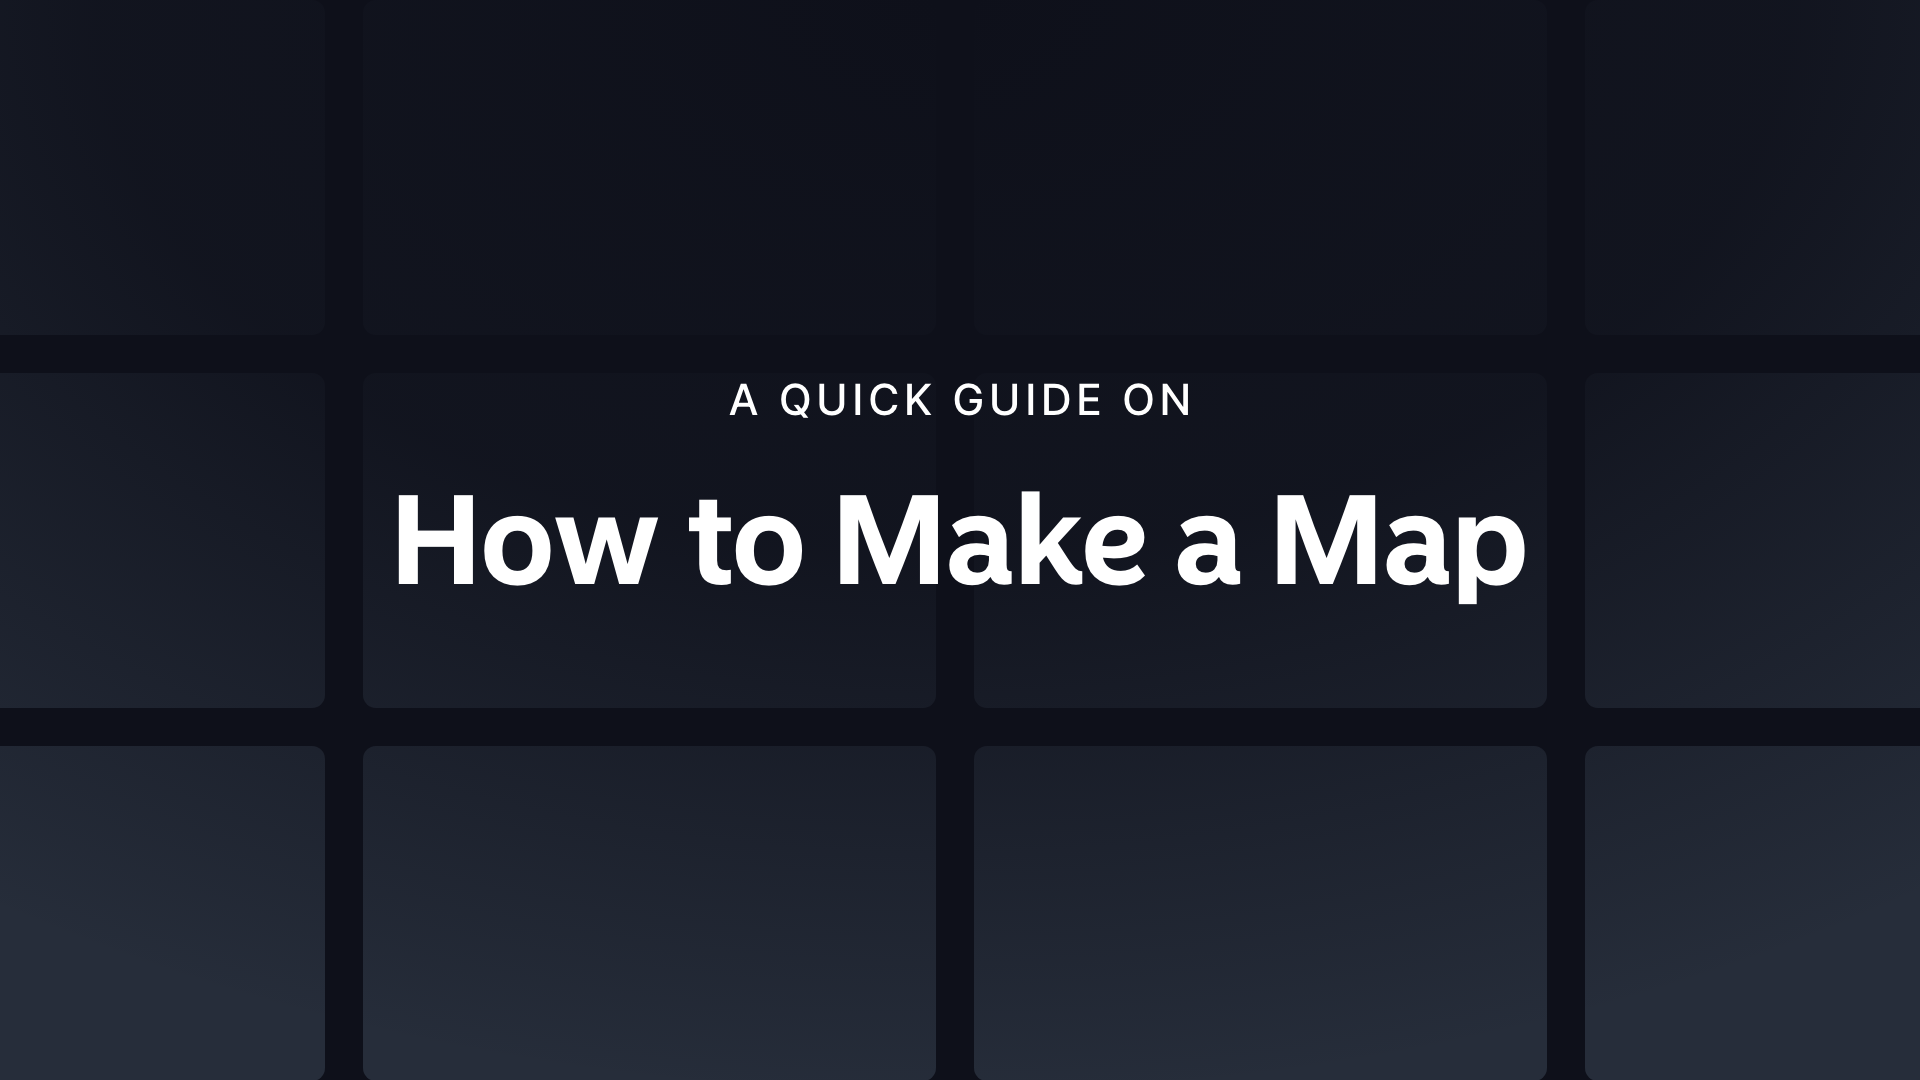 How to Make a Map